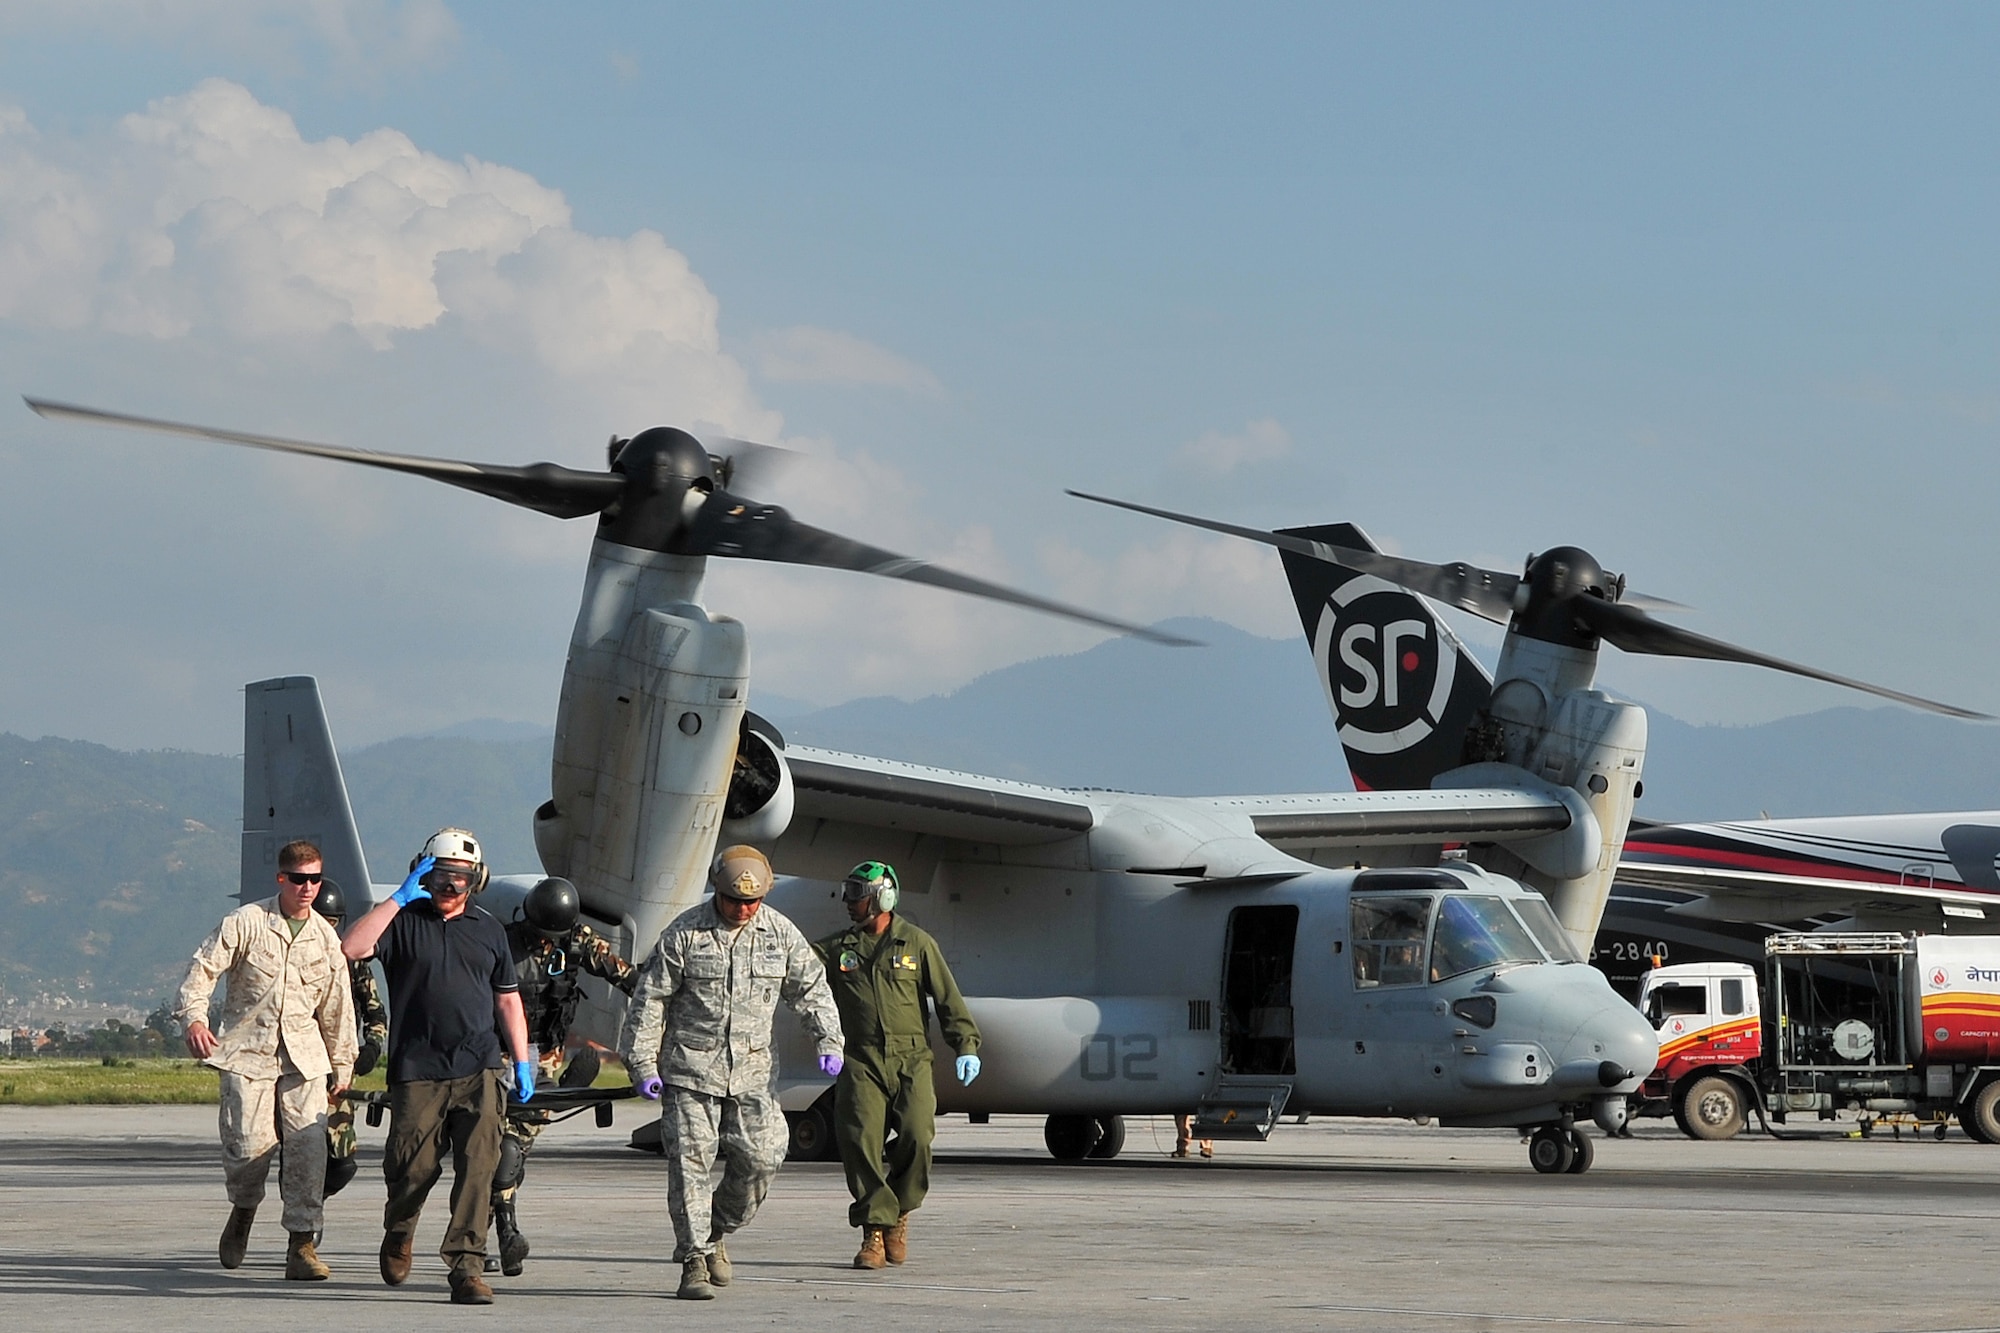 U.S. Air Force, Marines, and Nepalese army members transport an earthquake patient from a MV-22 Osprey for medical care at the Tribhuvan International Airport in Kathmandu, Nepal, May 12, 2015. The Joint Task Force-505 members worked with the Nepalese army to triage, treat and transport patients after a 7.3 magnitude earthquake struck the same day following a 7.8 magnitude quake that devastated the nation April 25, 2015. (U.S. Air Force photo by Staff Sgt. Melissa B. White/Released)